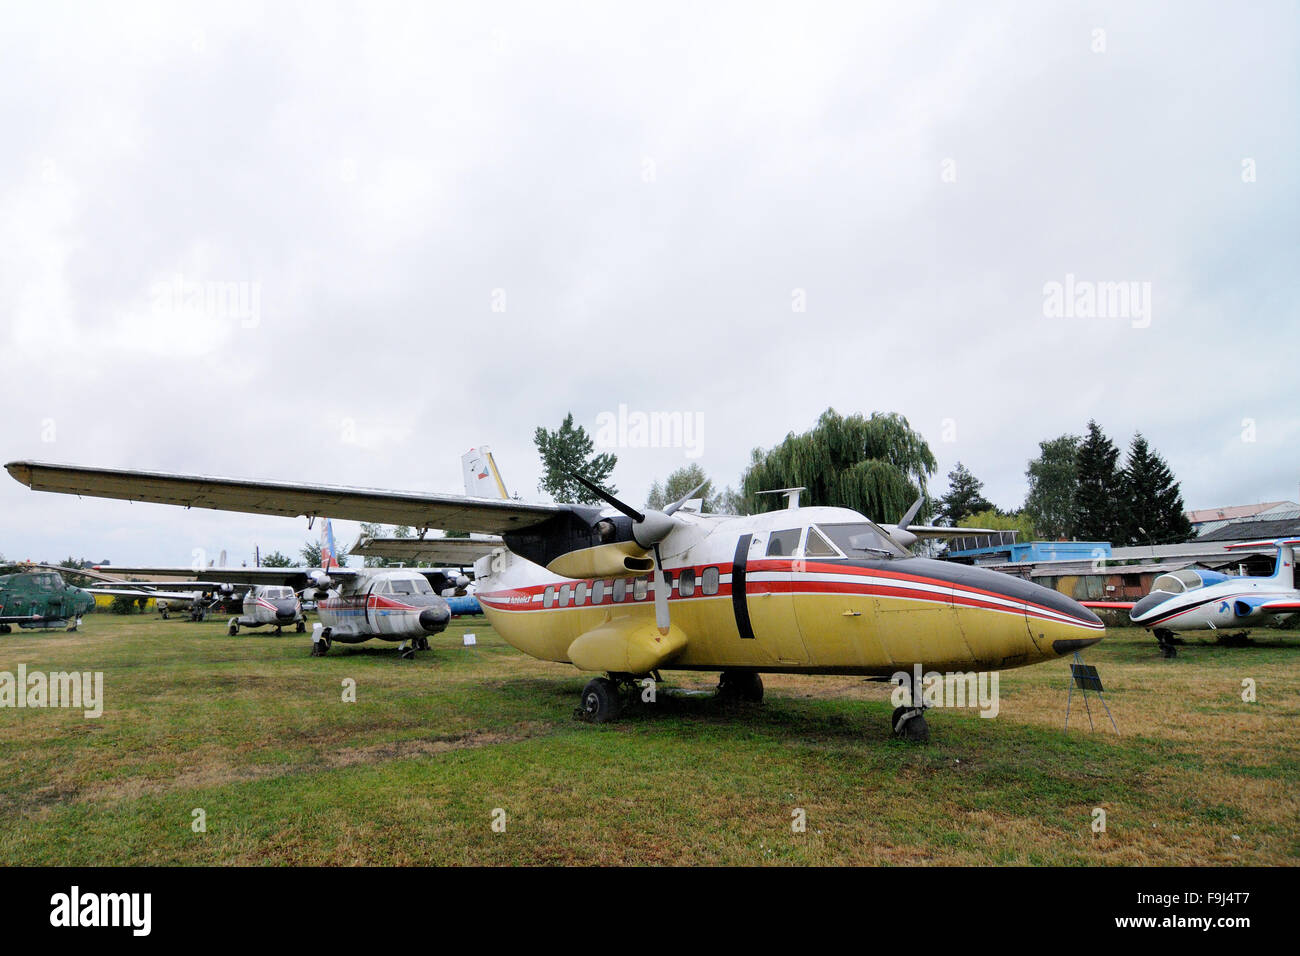 Museum of Aircrafts in Kunovice, Czech Republic Stock Photo